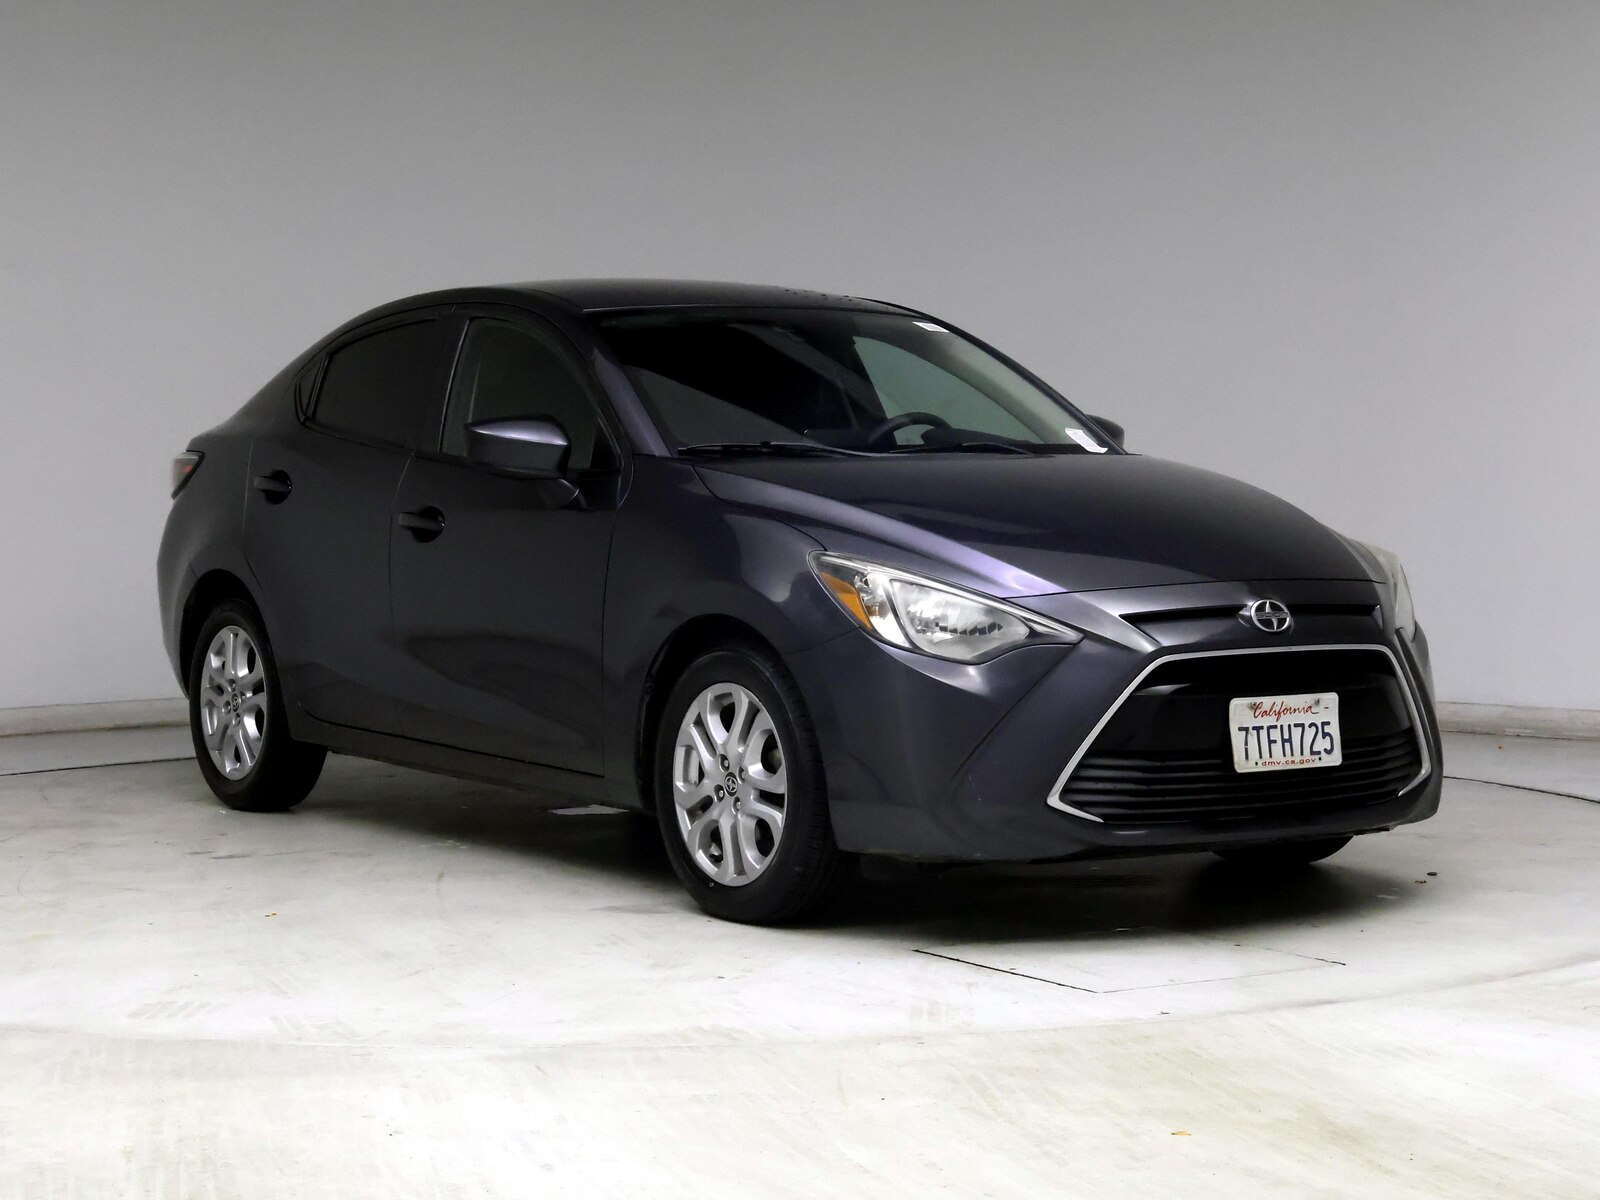 Used 2016 Scion iA  with VIN 3MYDLBZV3GY115535 for sale in Spokane Valley, WA